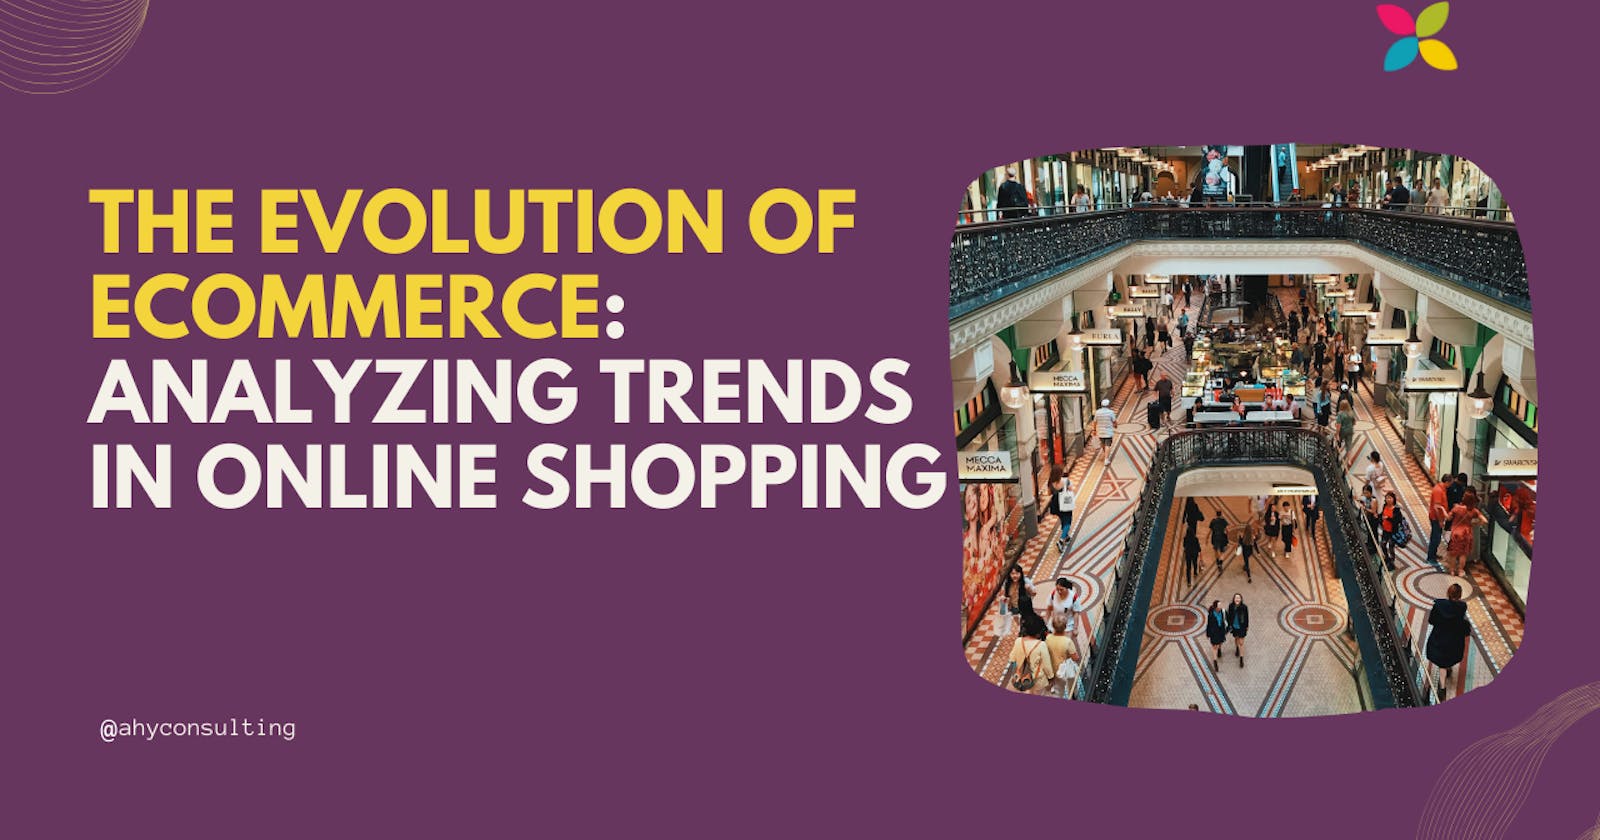 The Evolution of eCommerce: Analyzing Trends in Online Shopping